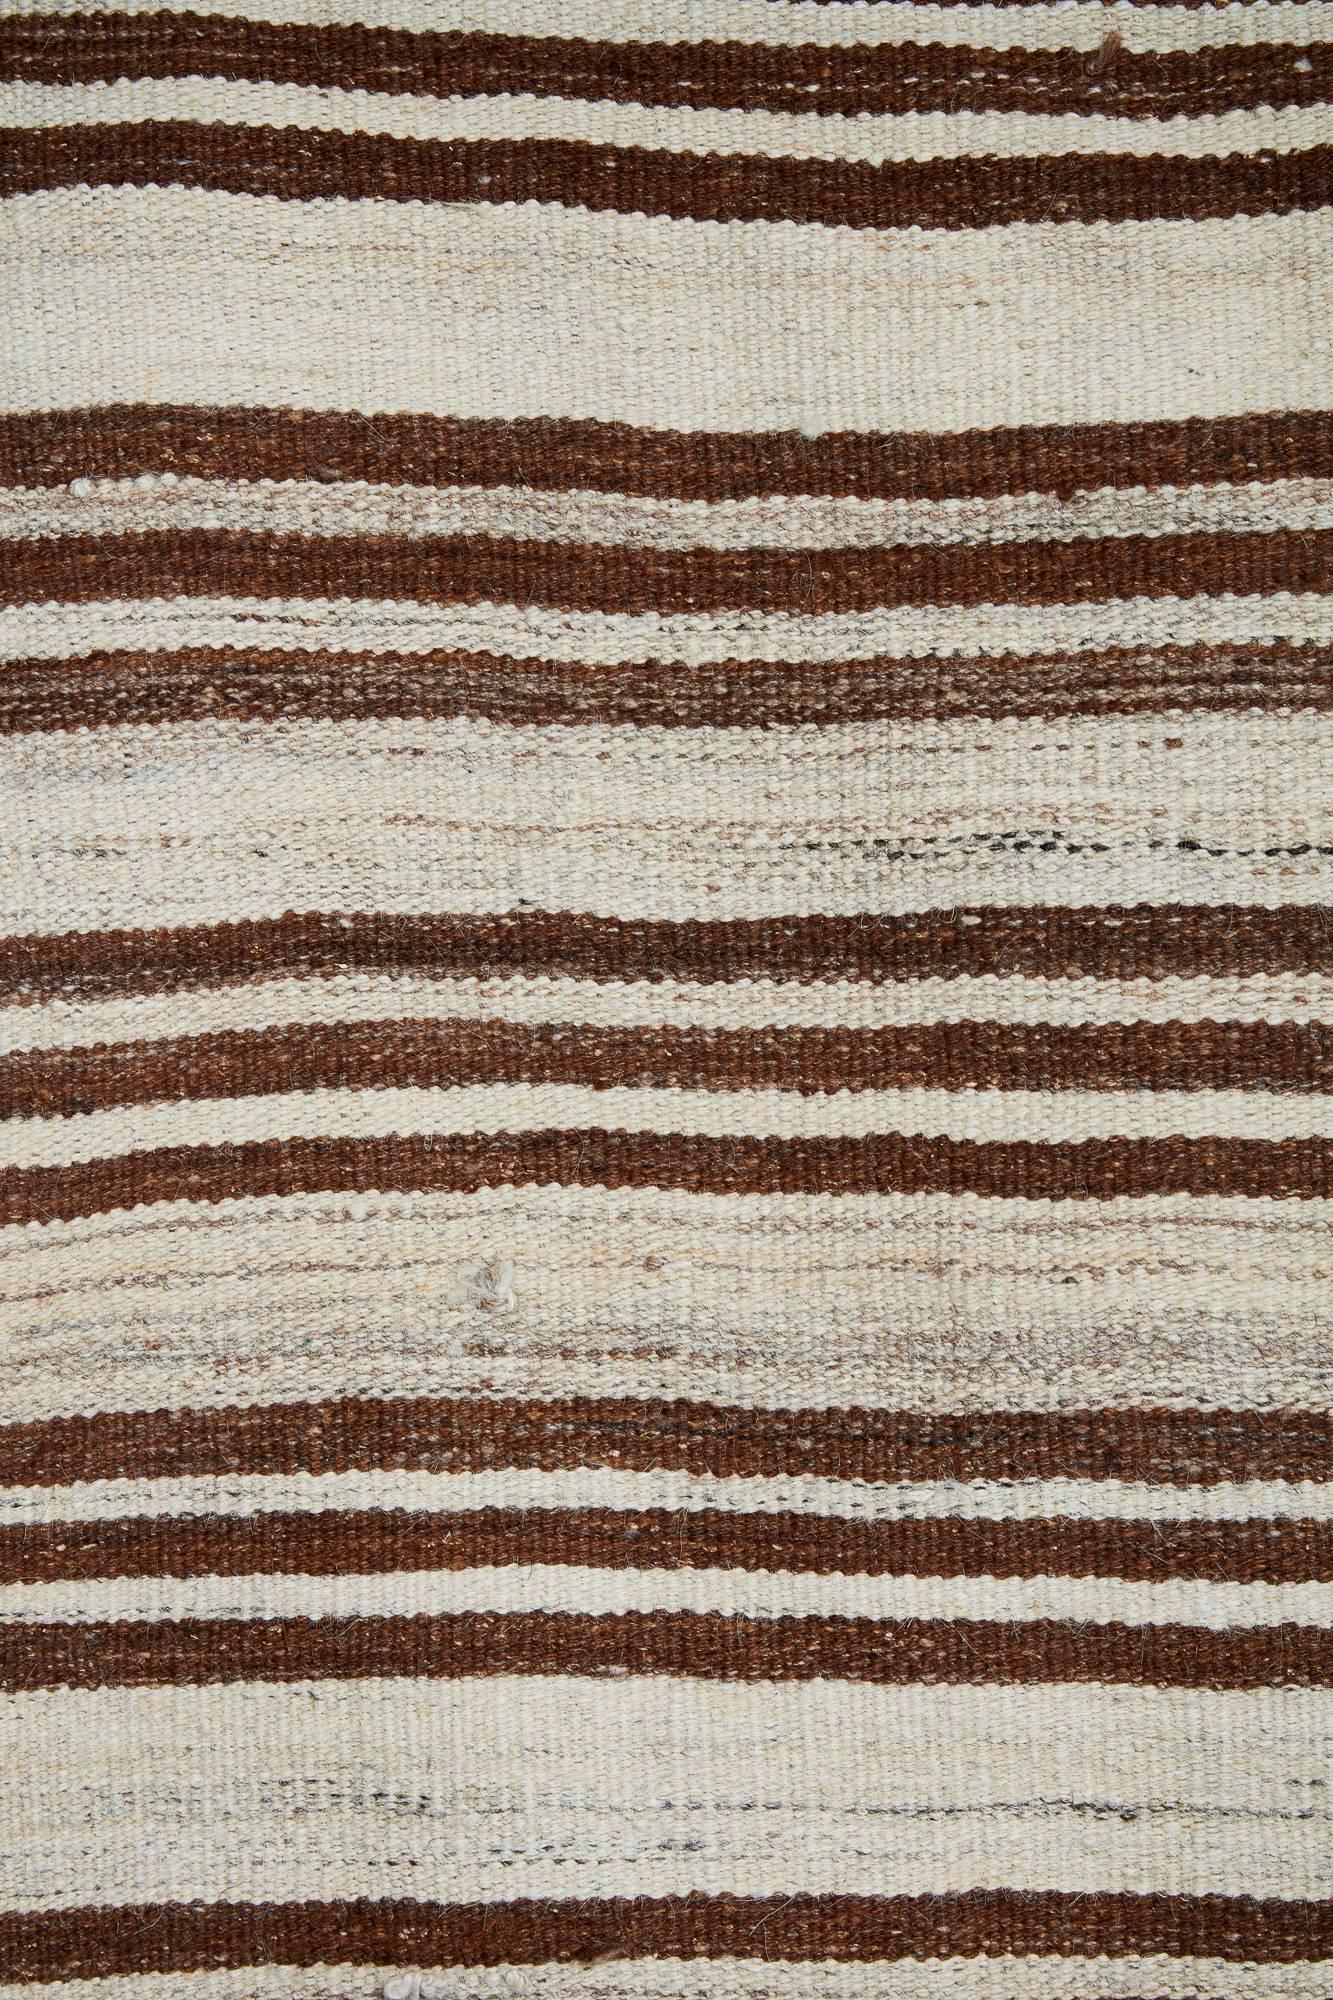 20th century Turkish striped flat-weave Kilim
Shades of crème and brown make up this wonderful Turkish Kilim
Nice size makes this easily useable for interior spaces.
 